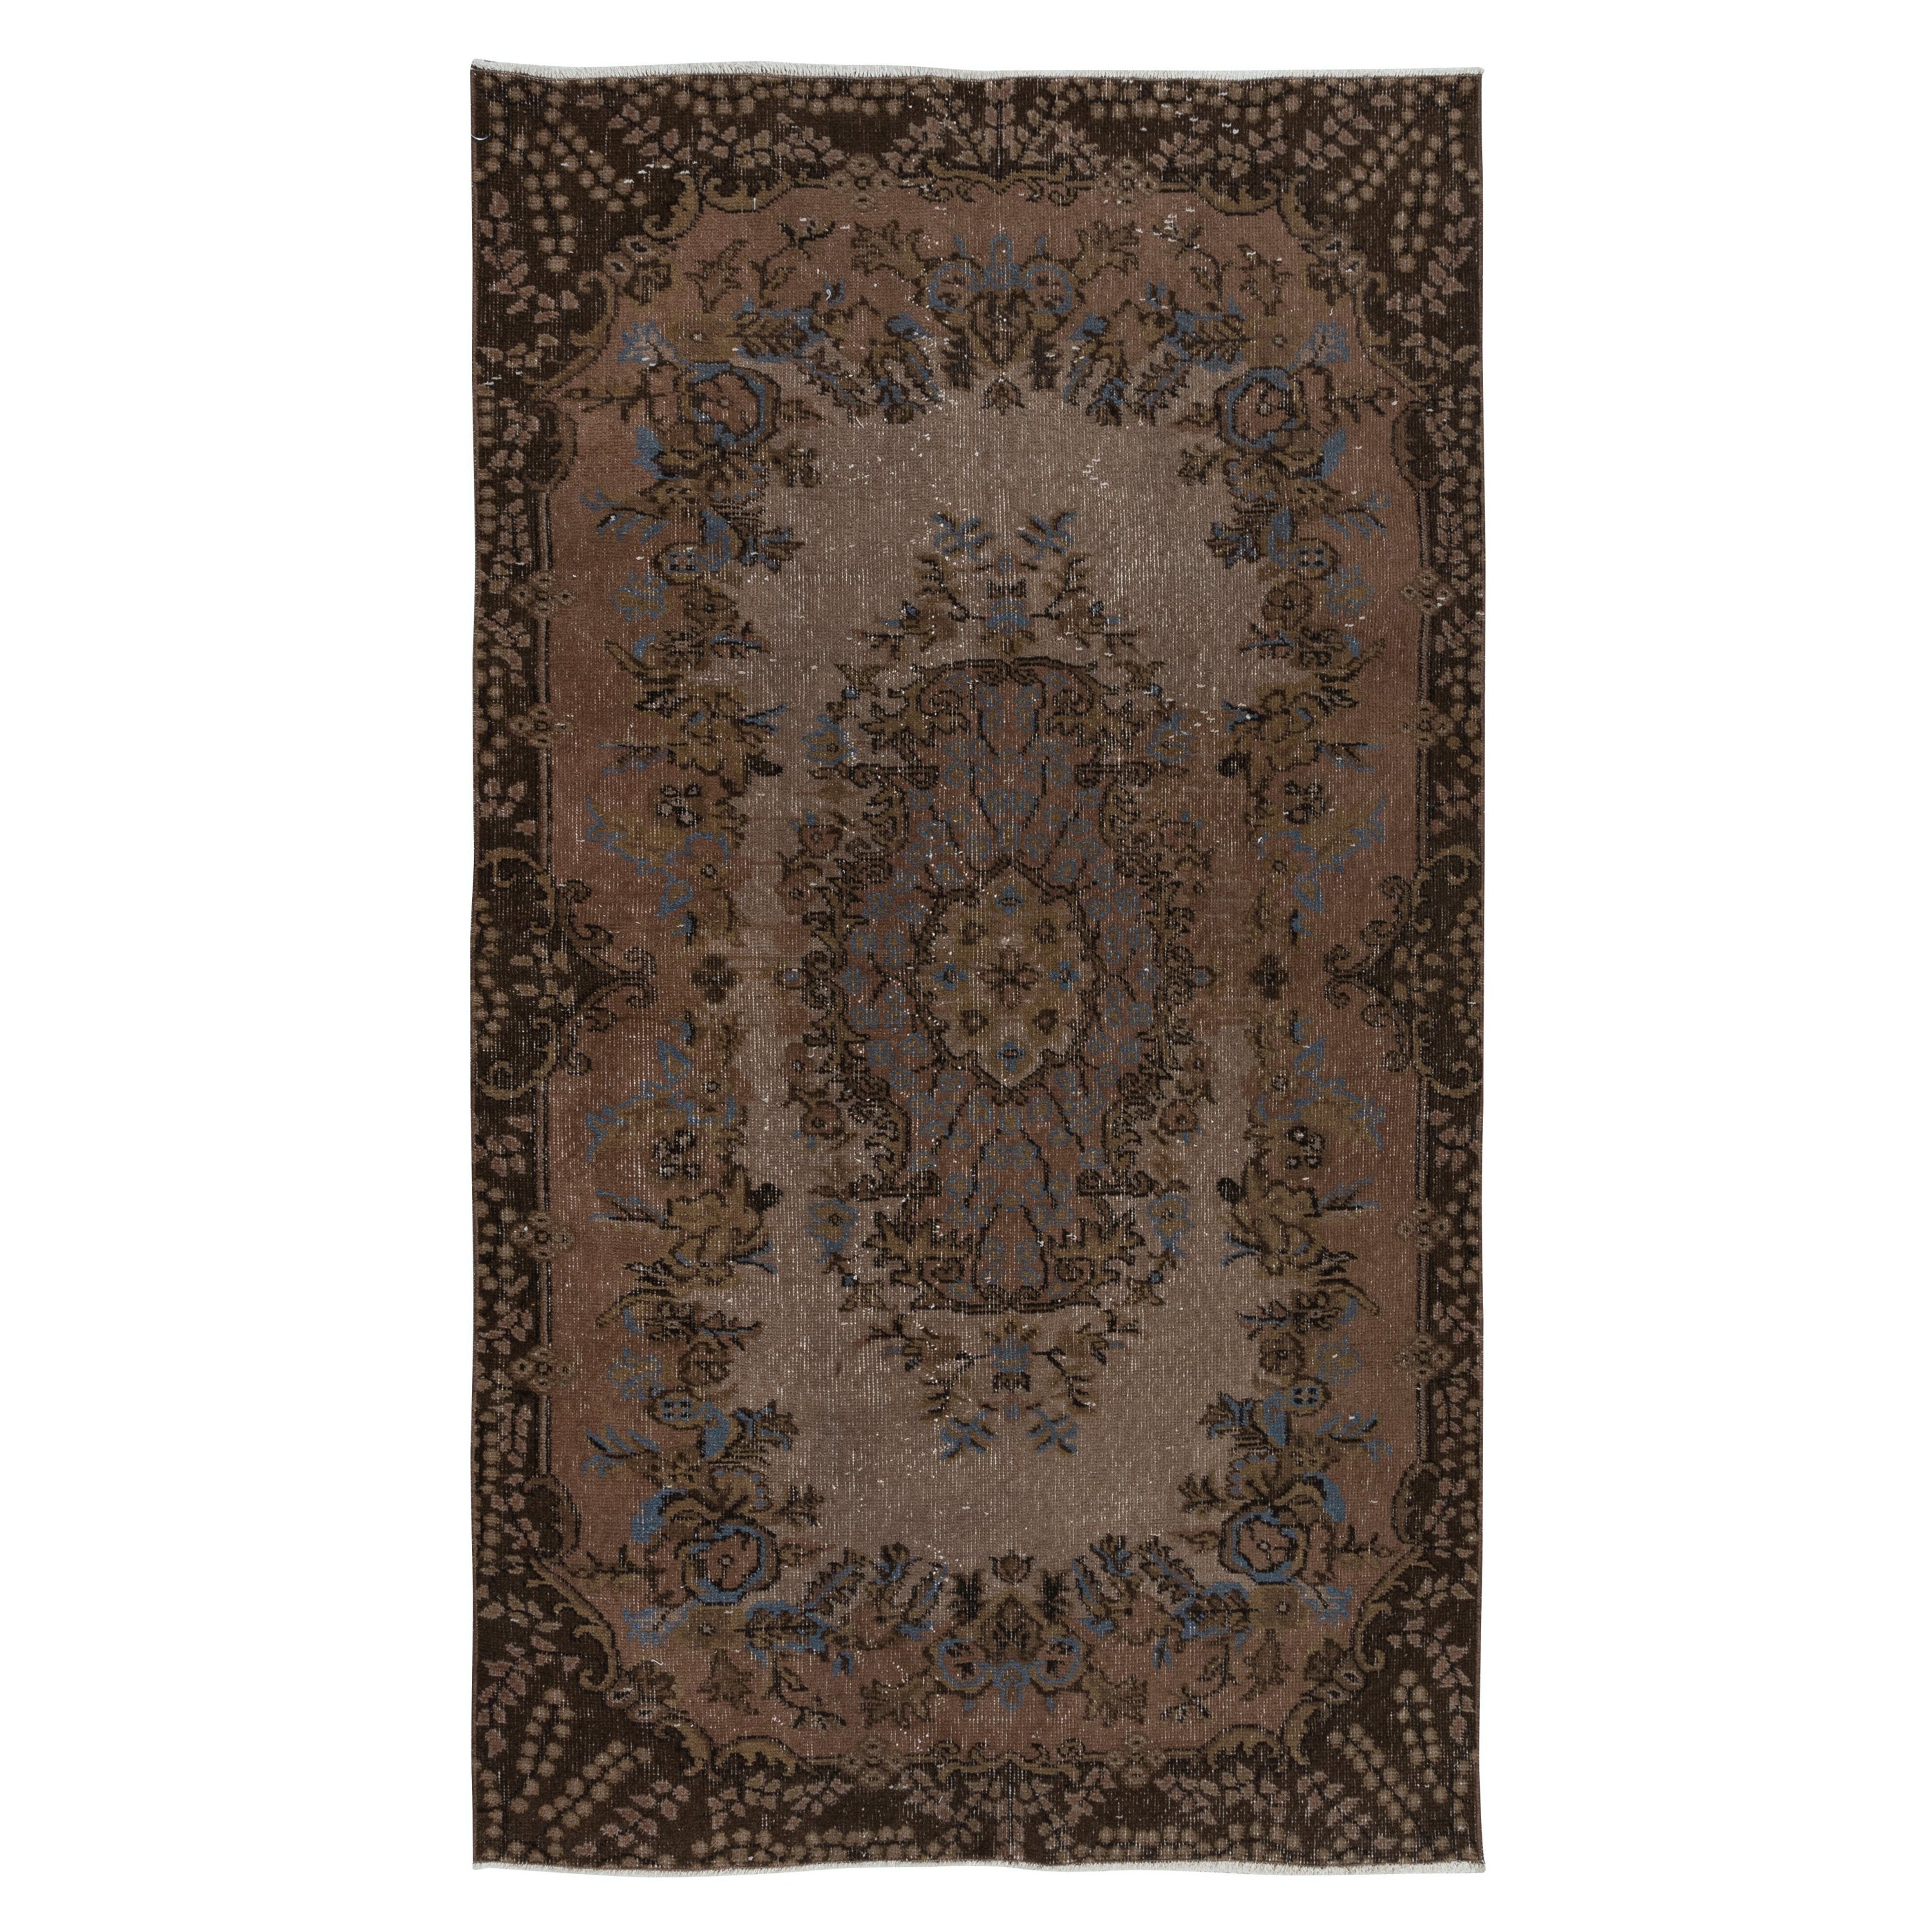 4x6.7 Ft Small Modern Brown Rug with Medallion Design, Handknotted in Turkey (tapis noué à la main en Turquie)